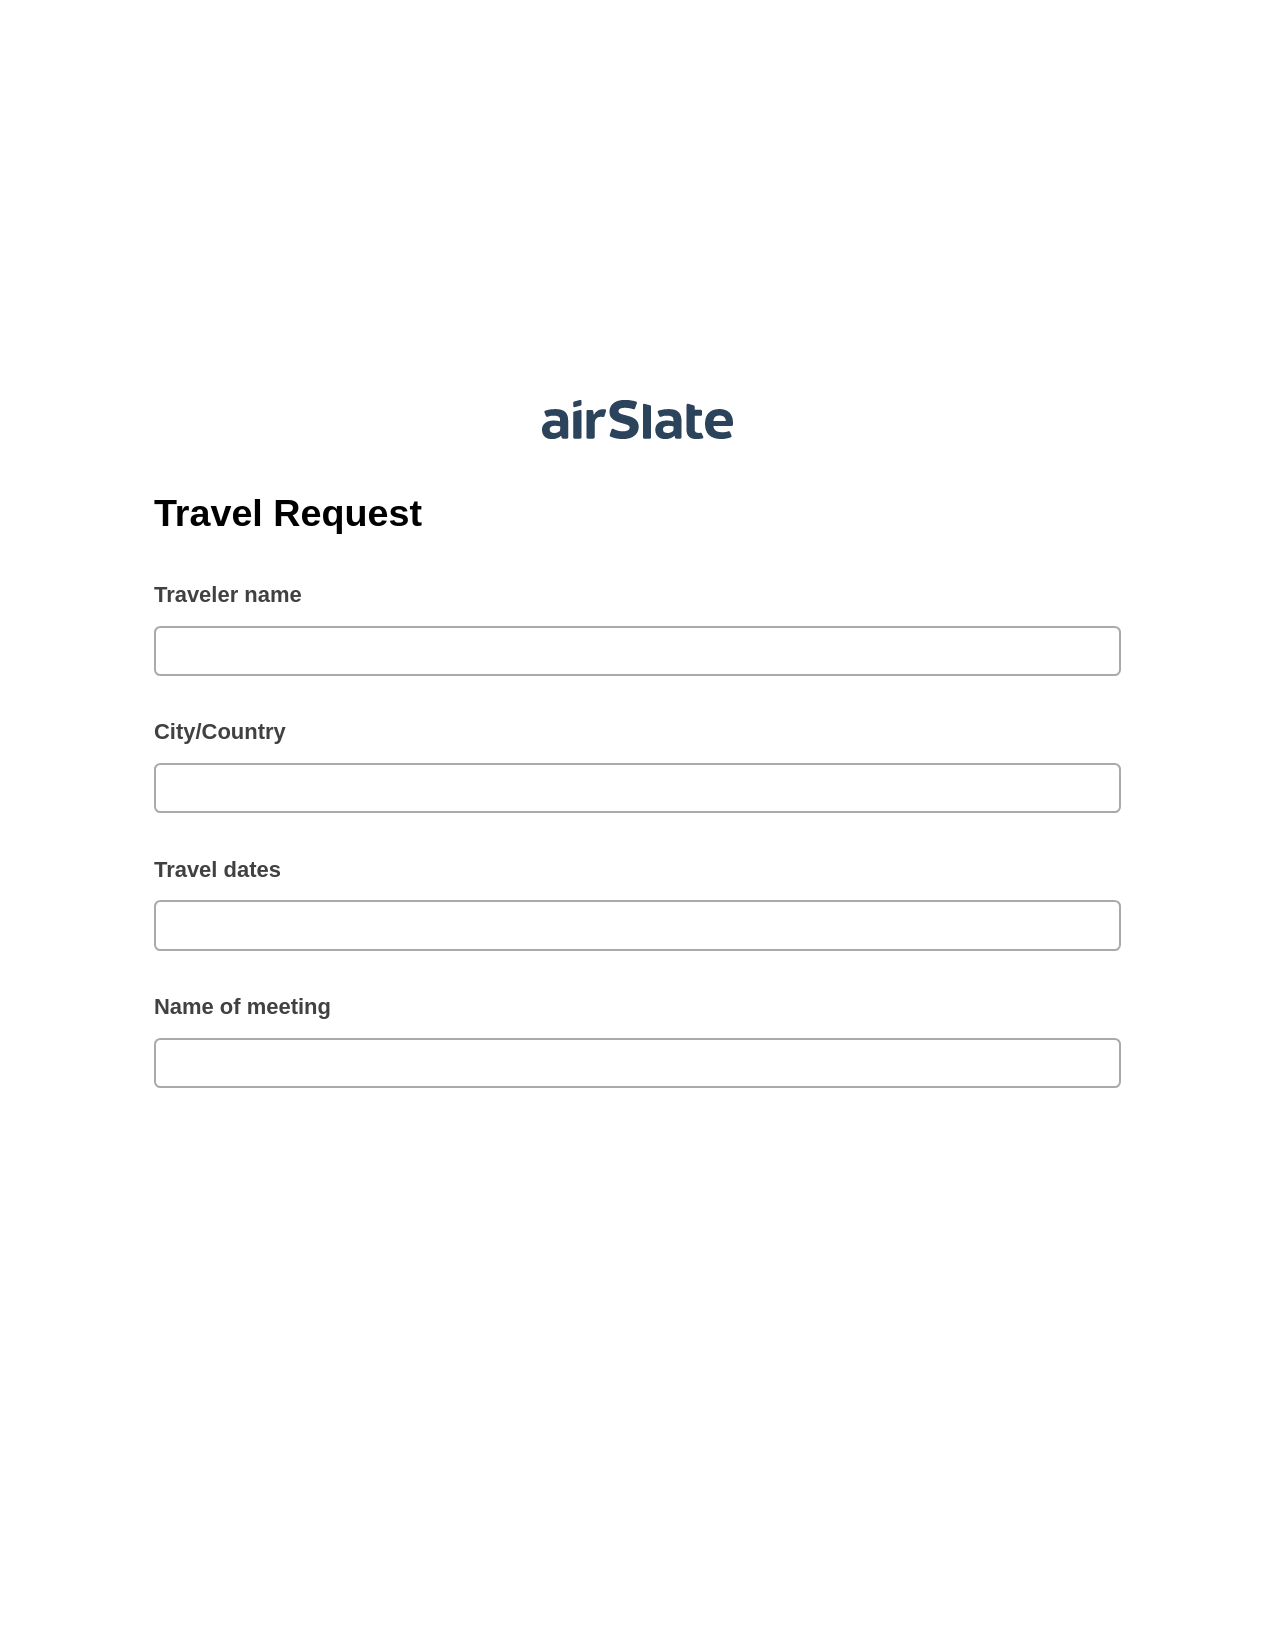 Multirole Travel Request Pre-fill from CSV File Bot, Create Slate Reminder Bot, Archive to SharePoint Folder Bot